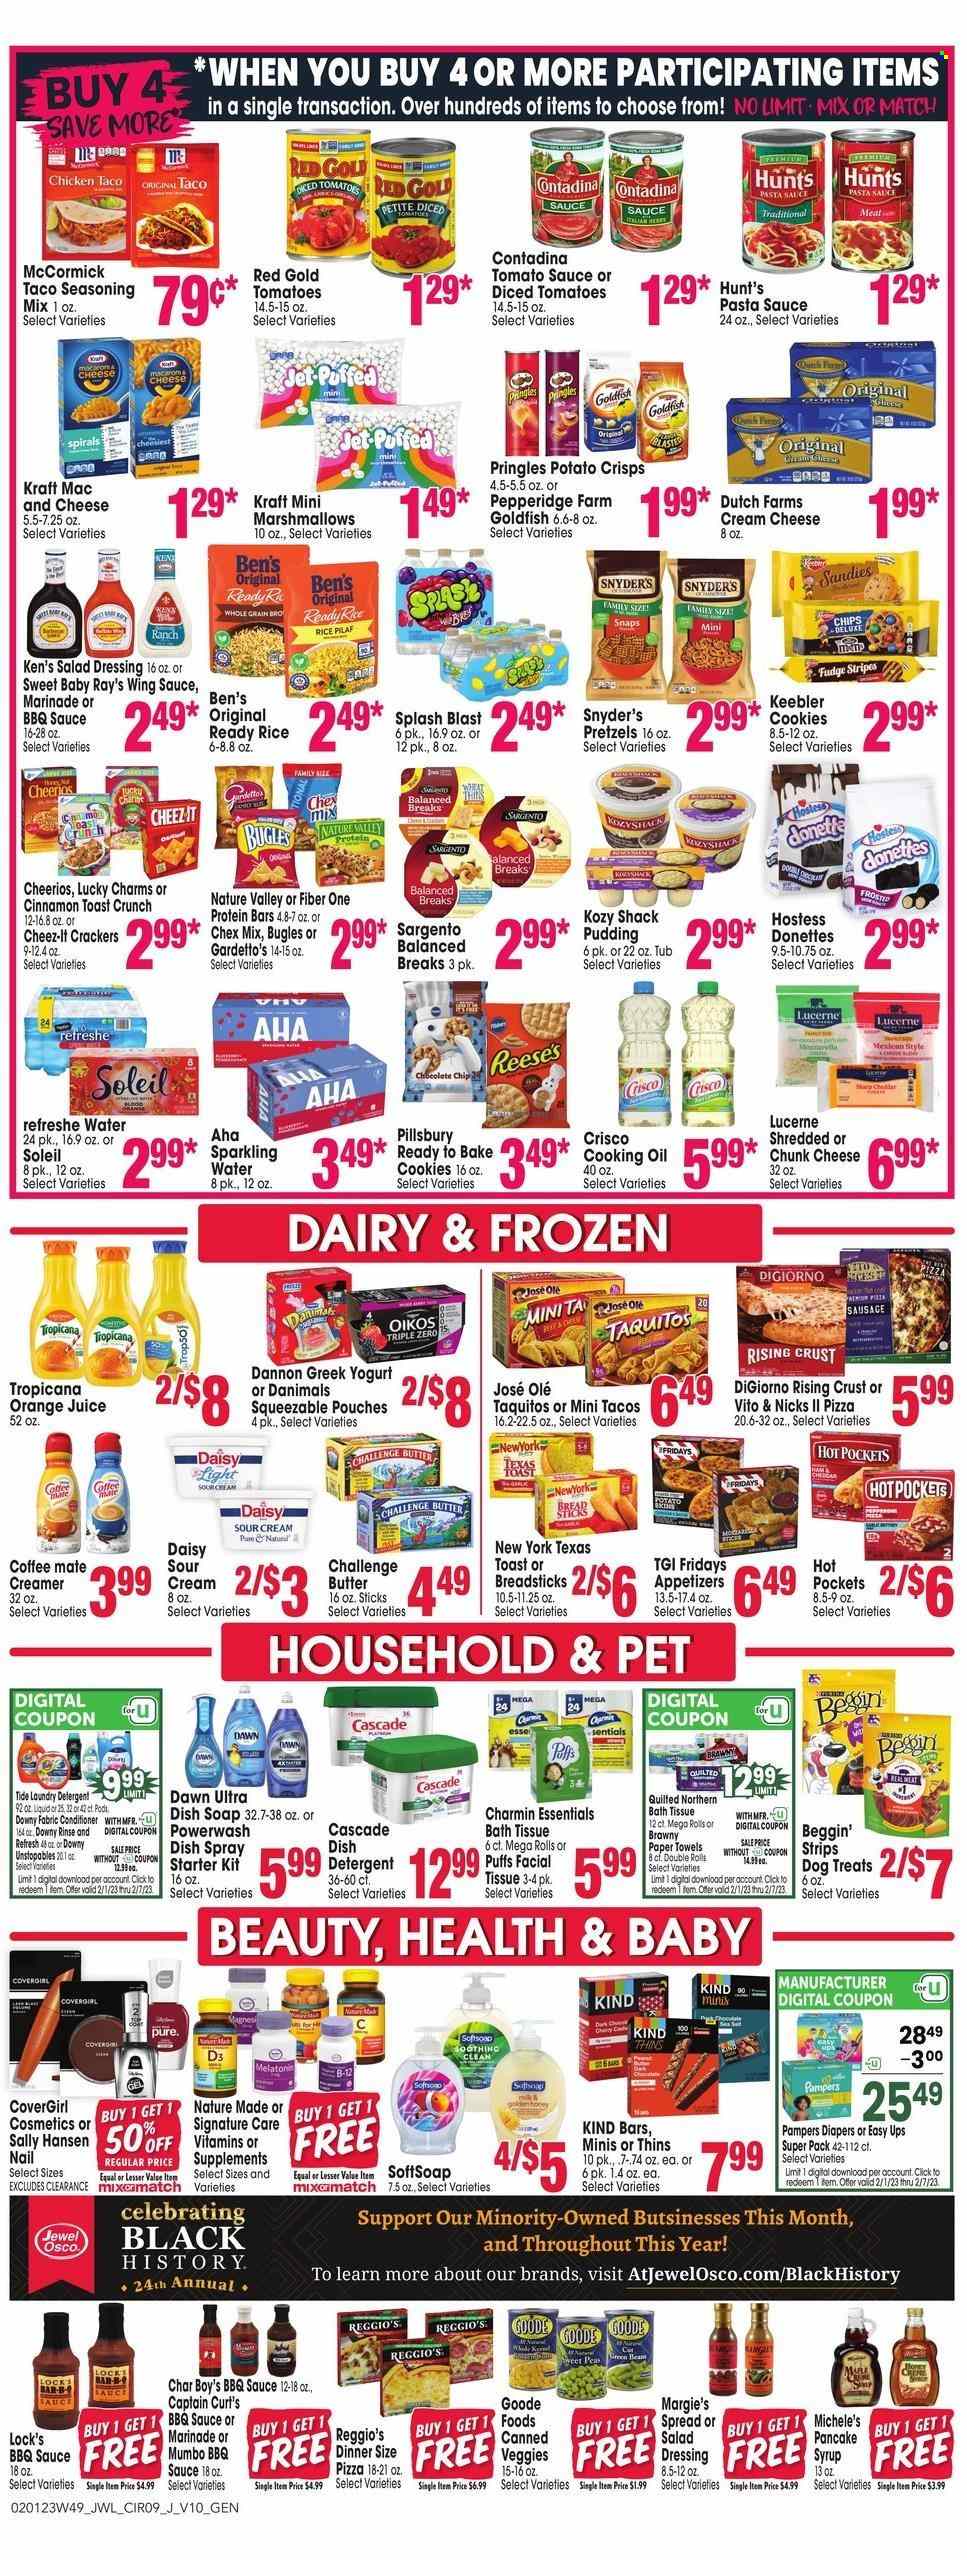 thumbnail - Jewel Osco Flyer - 02/01/2023 - 02/07/2023 - Sales products - pretzels, tacos, puffs, macaroni & cheese, hot pocket, pizza, pasta sauce, pancakes, Pillsbury, taquitos, Kraft®, sausage, cream cheese, chunk cheese, Sargento, greek yoghurt, pudding, yoghurt, Oikos, Dannon, Danimals, Coffee-Mate, sour cream, creamer, Reese's, strips, cookies, fudge, marshmallows, crackers, Keebler, bread sticks, potato crisps, Pringles, Thins, Goldfish, Cheez-It, Chex Mix, Crisco, tomato sauce, diced tomatoes, Cheerios, protein bar, Nature Valley, Fiber One, rice, spice, cinnamon, BBQ sauce, salad dressing, dressing, marinade, wing sauce, oil, cooking oil, syrup, orange juice, juice, sparkling water, Pampers, nappies, bath tissue, Quilted Northern, kitchen towels, paper towels, Charmin, detergent, Cascade, Tide, Unstopables, laundry detergent, Downy Laundry, dishwasher cleaner, Jet, Softsoap, soap, Sally Hansen, Beggin', Melatonin, Nature Made. Page 8.